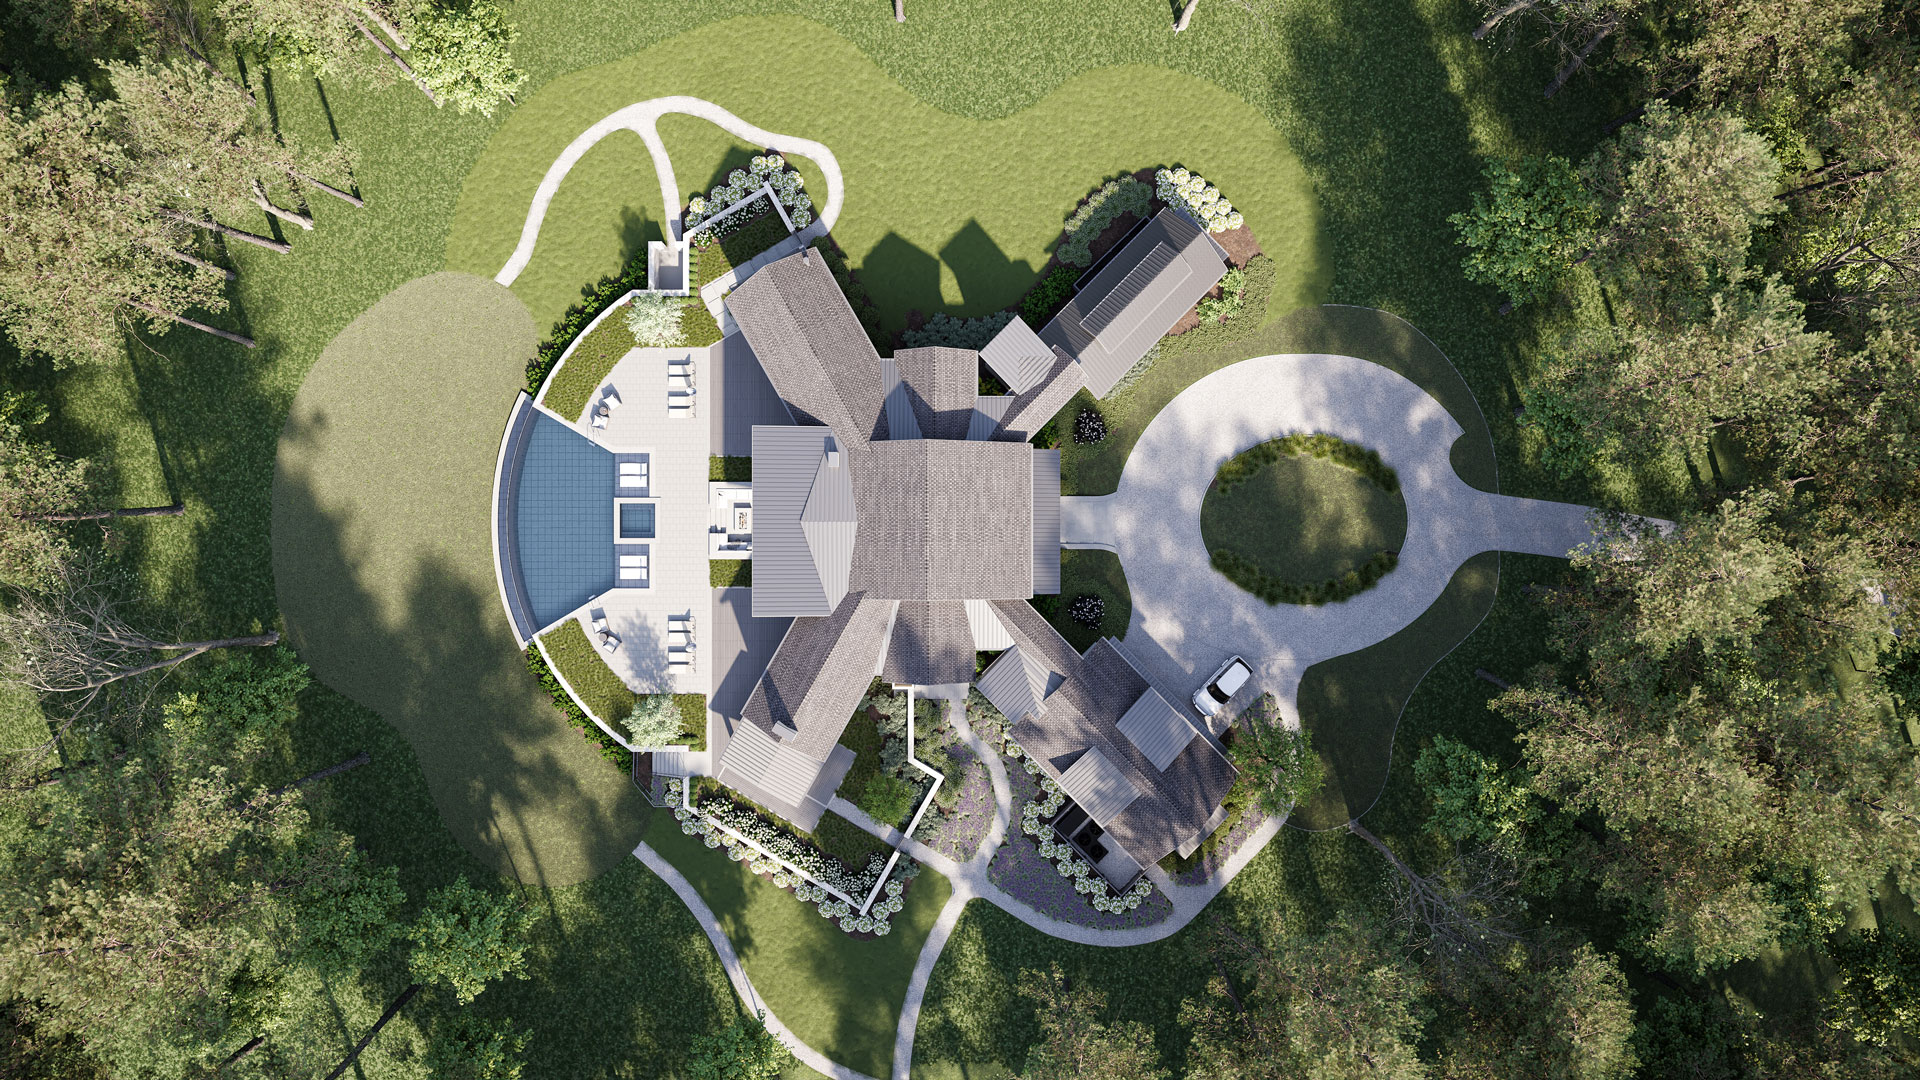 Exterior Renderings for a House in Georgia: the Bird View